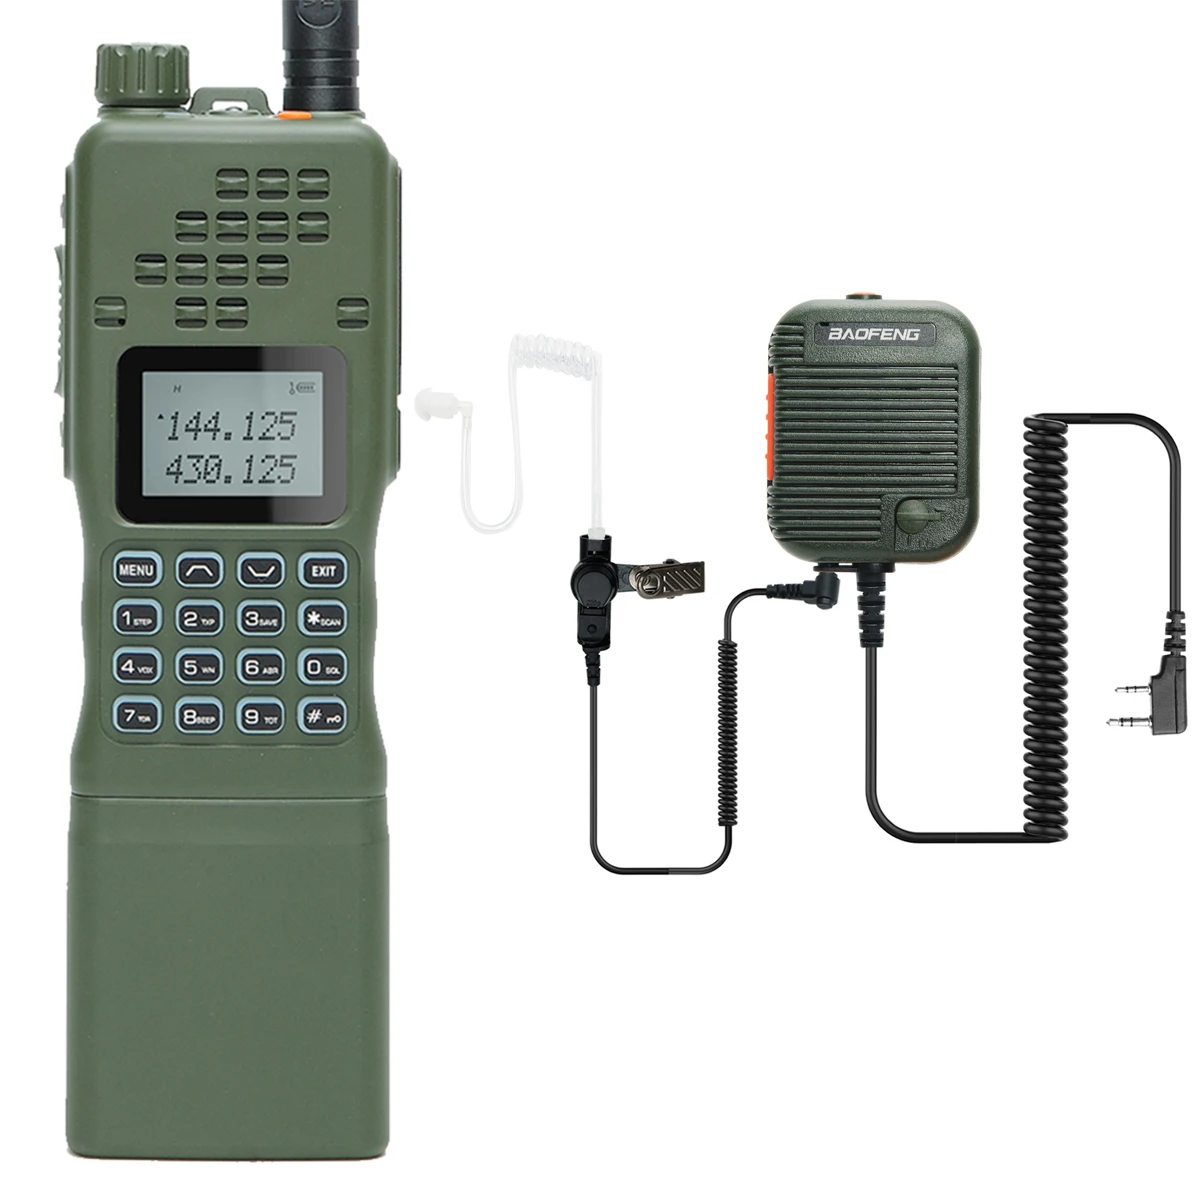 Source Baofeng AR-152 VHF/UHF 15W Walkie Talkie USB Charger MBITR Tactical  AN /PRC-152 2-Way Radio with Speaker Mic Volume Adjust on